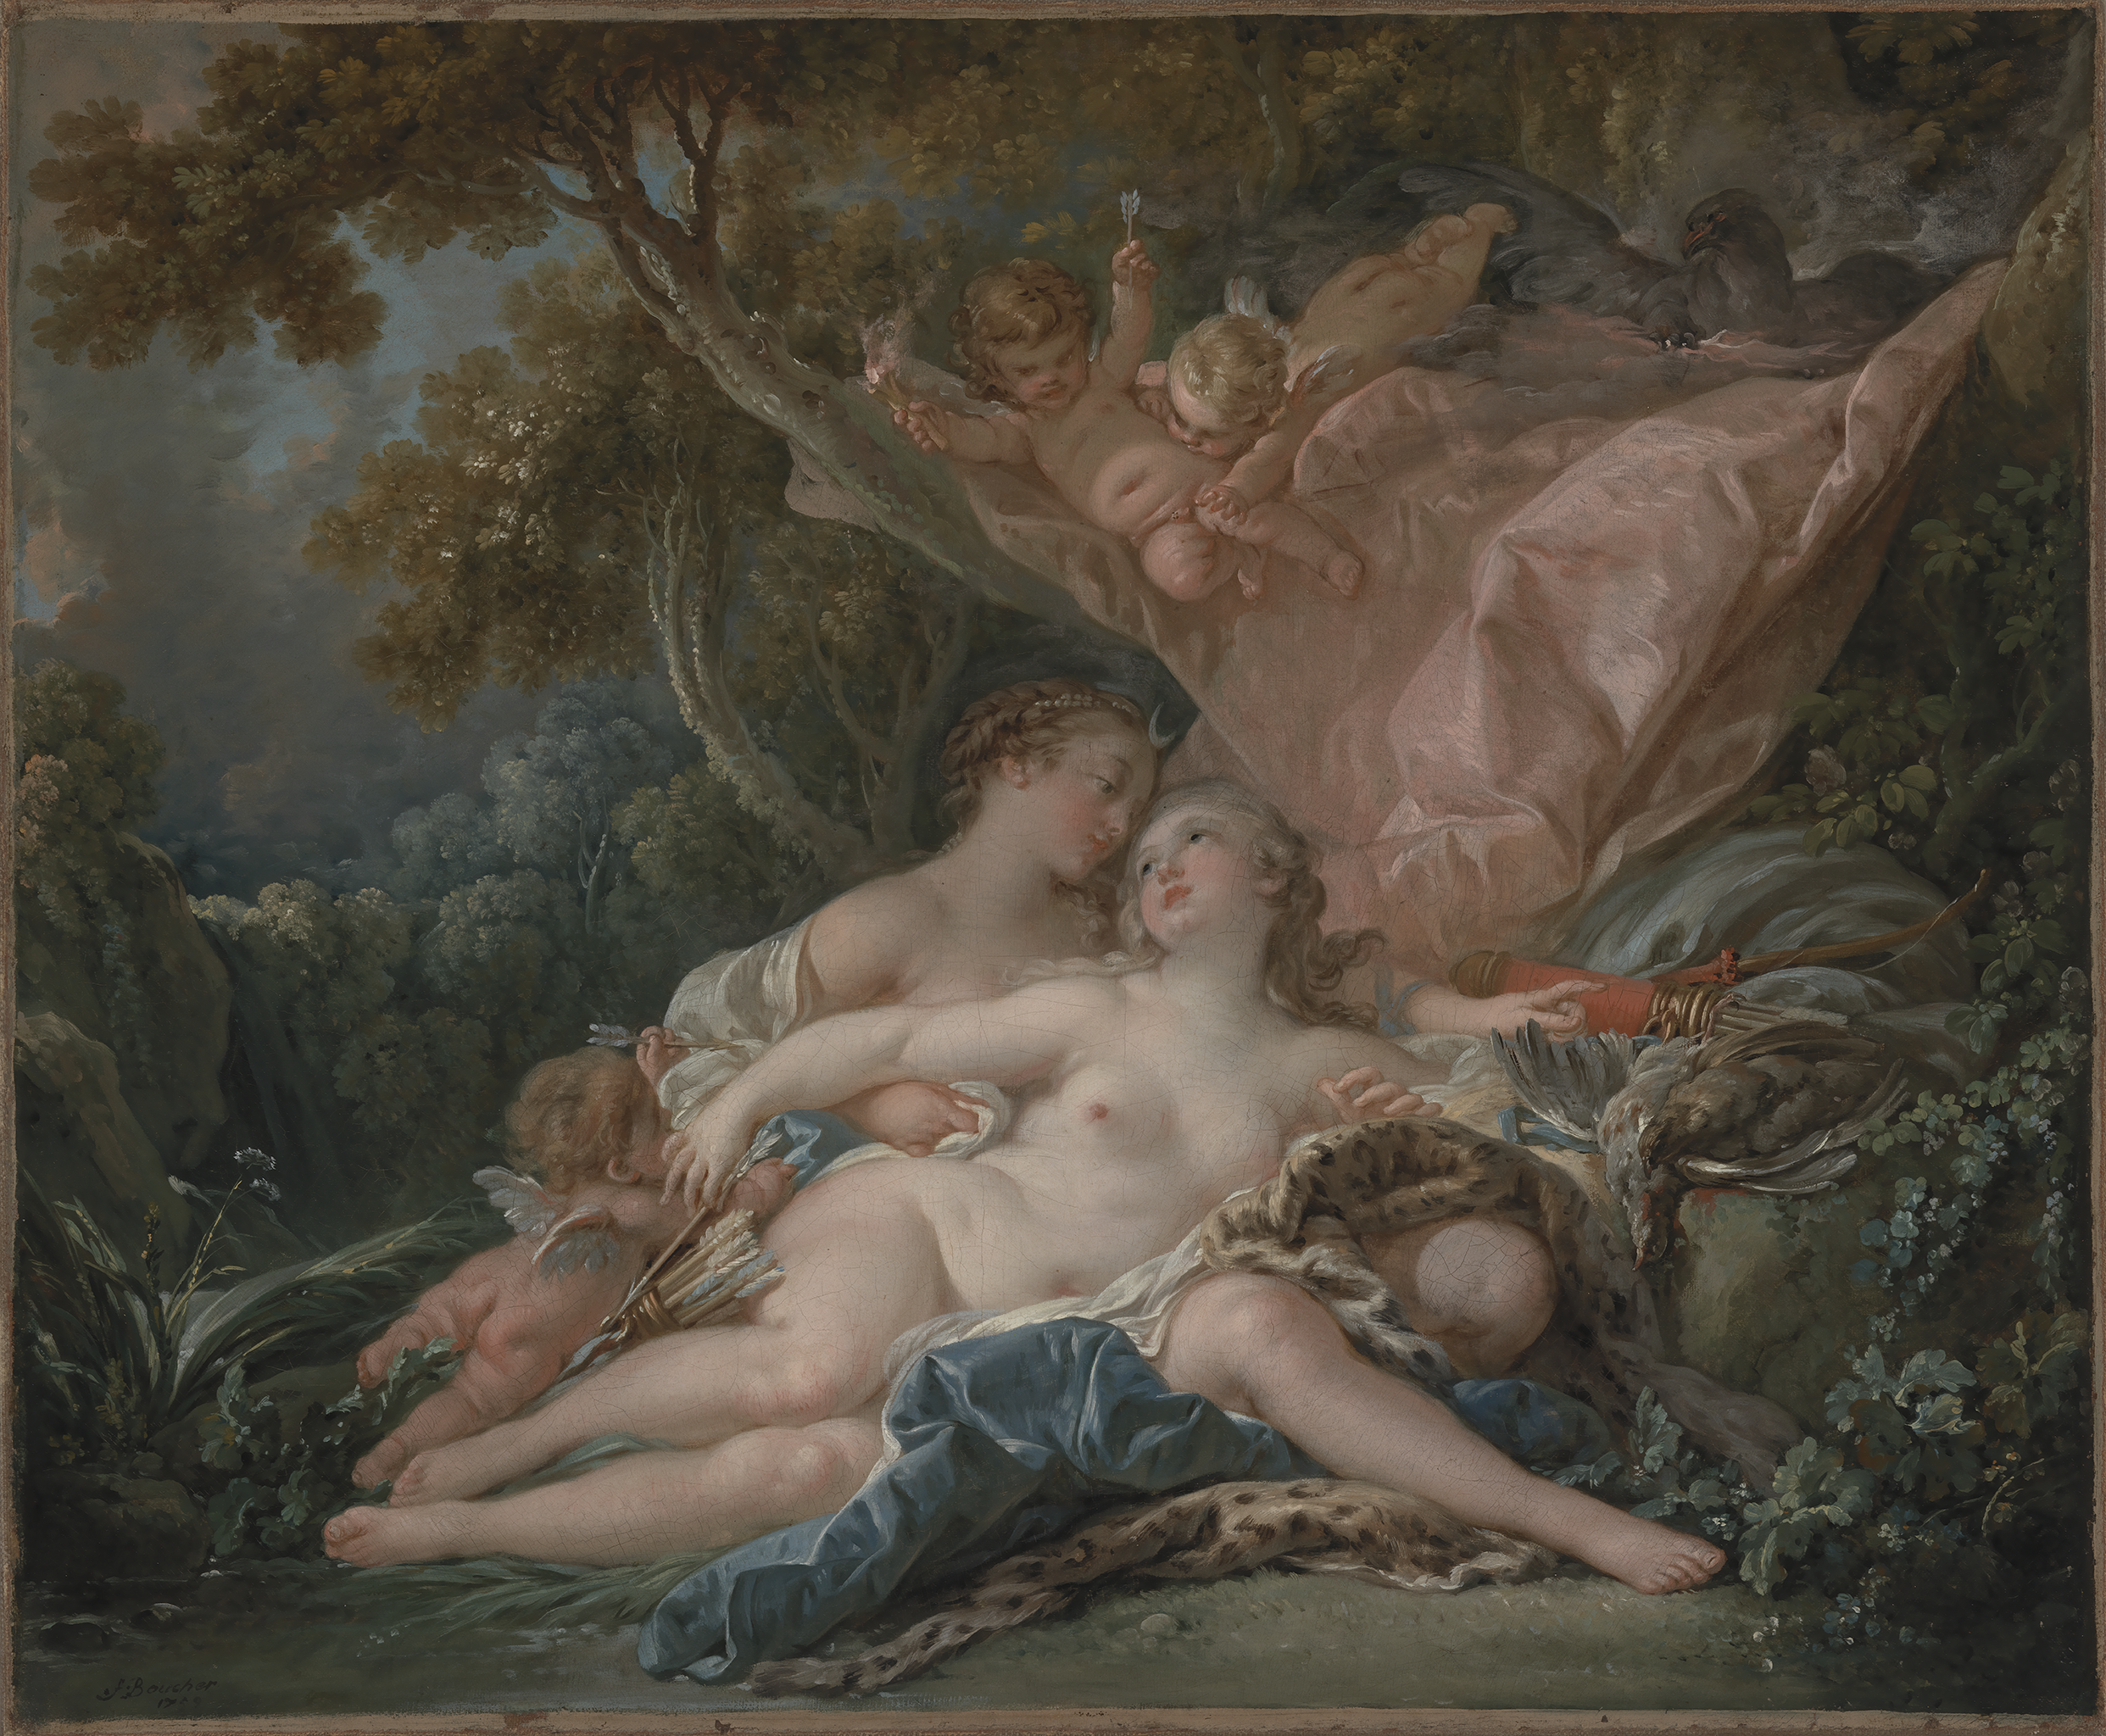 A painting depicting two nude women laying on the ground on a blue blanket and animal skin. Above them, there is a large pink blanket or cloth with babies with wings sliding off of it. In the background consists of a dense forest.